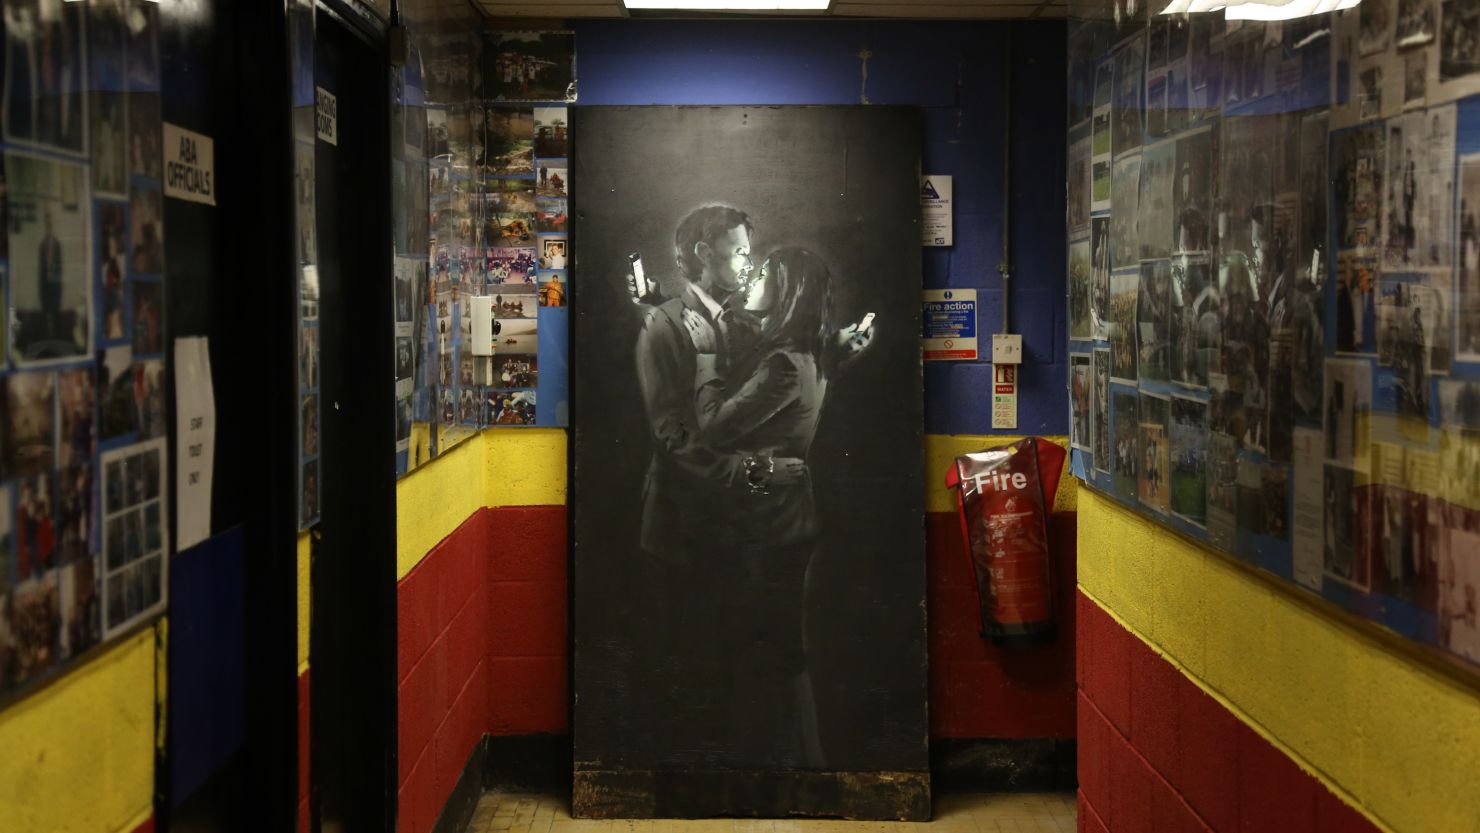 New Banksy artwork, Mobile Lovers, displayed inside the Broad Plain Boys youth center on April 16, 2014 in Bristol, England. 